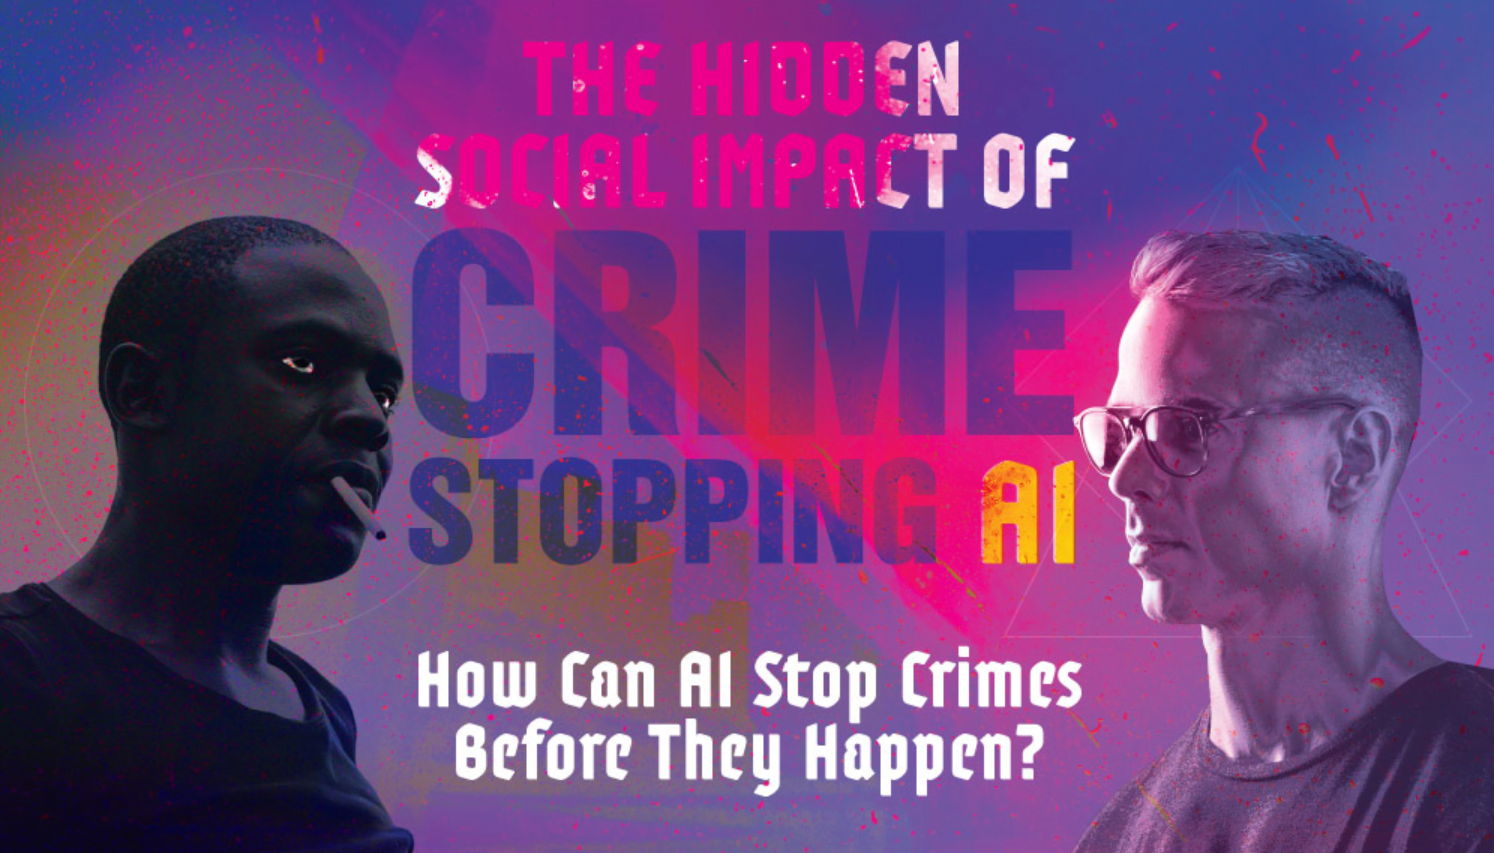 Crime-Stopping AI